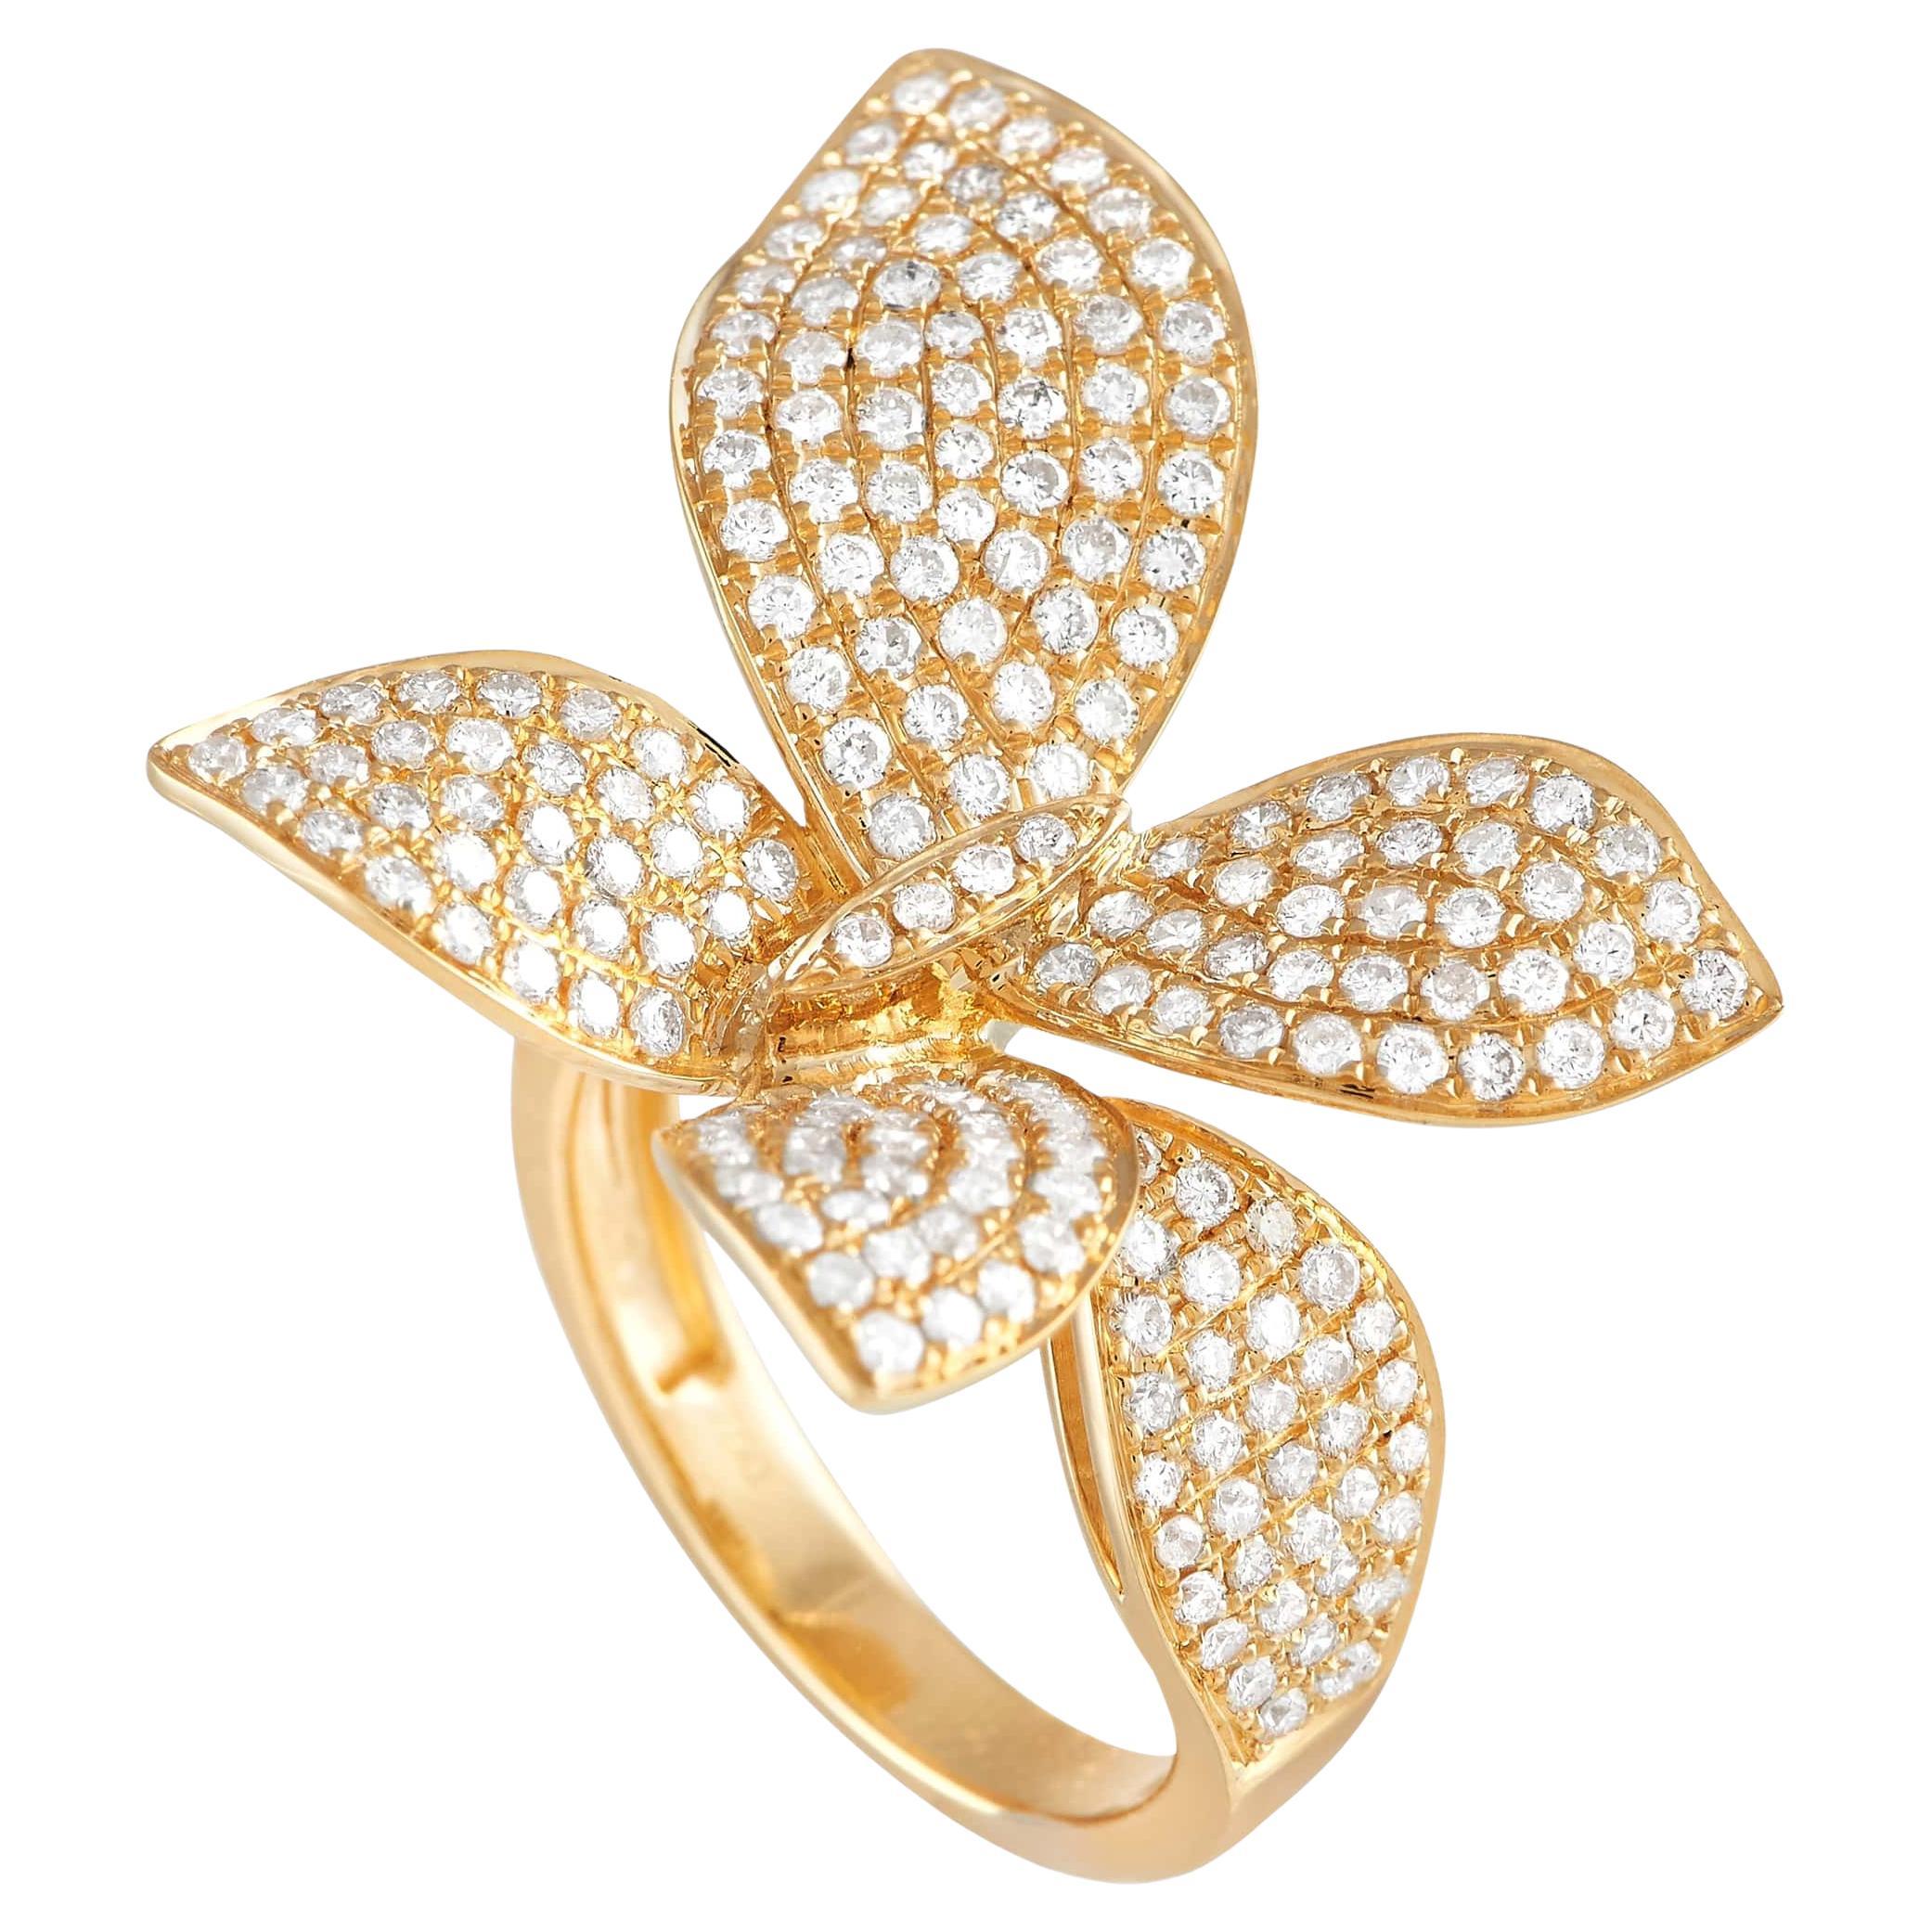 LB Exclusive 18k Yellow Gold 1.85ct Diamond Orchid Ring For Sale